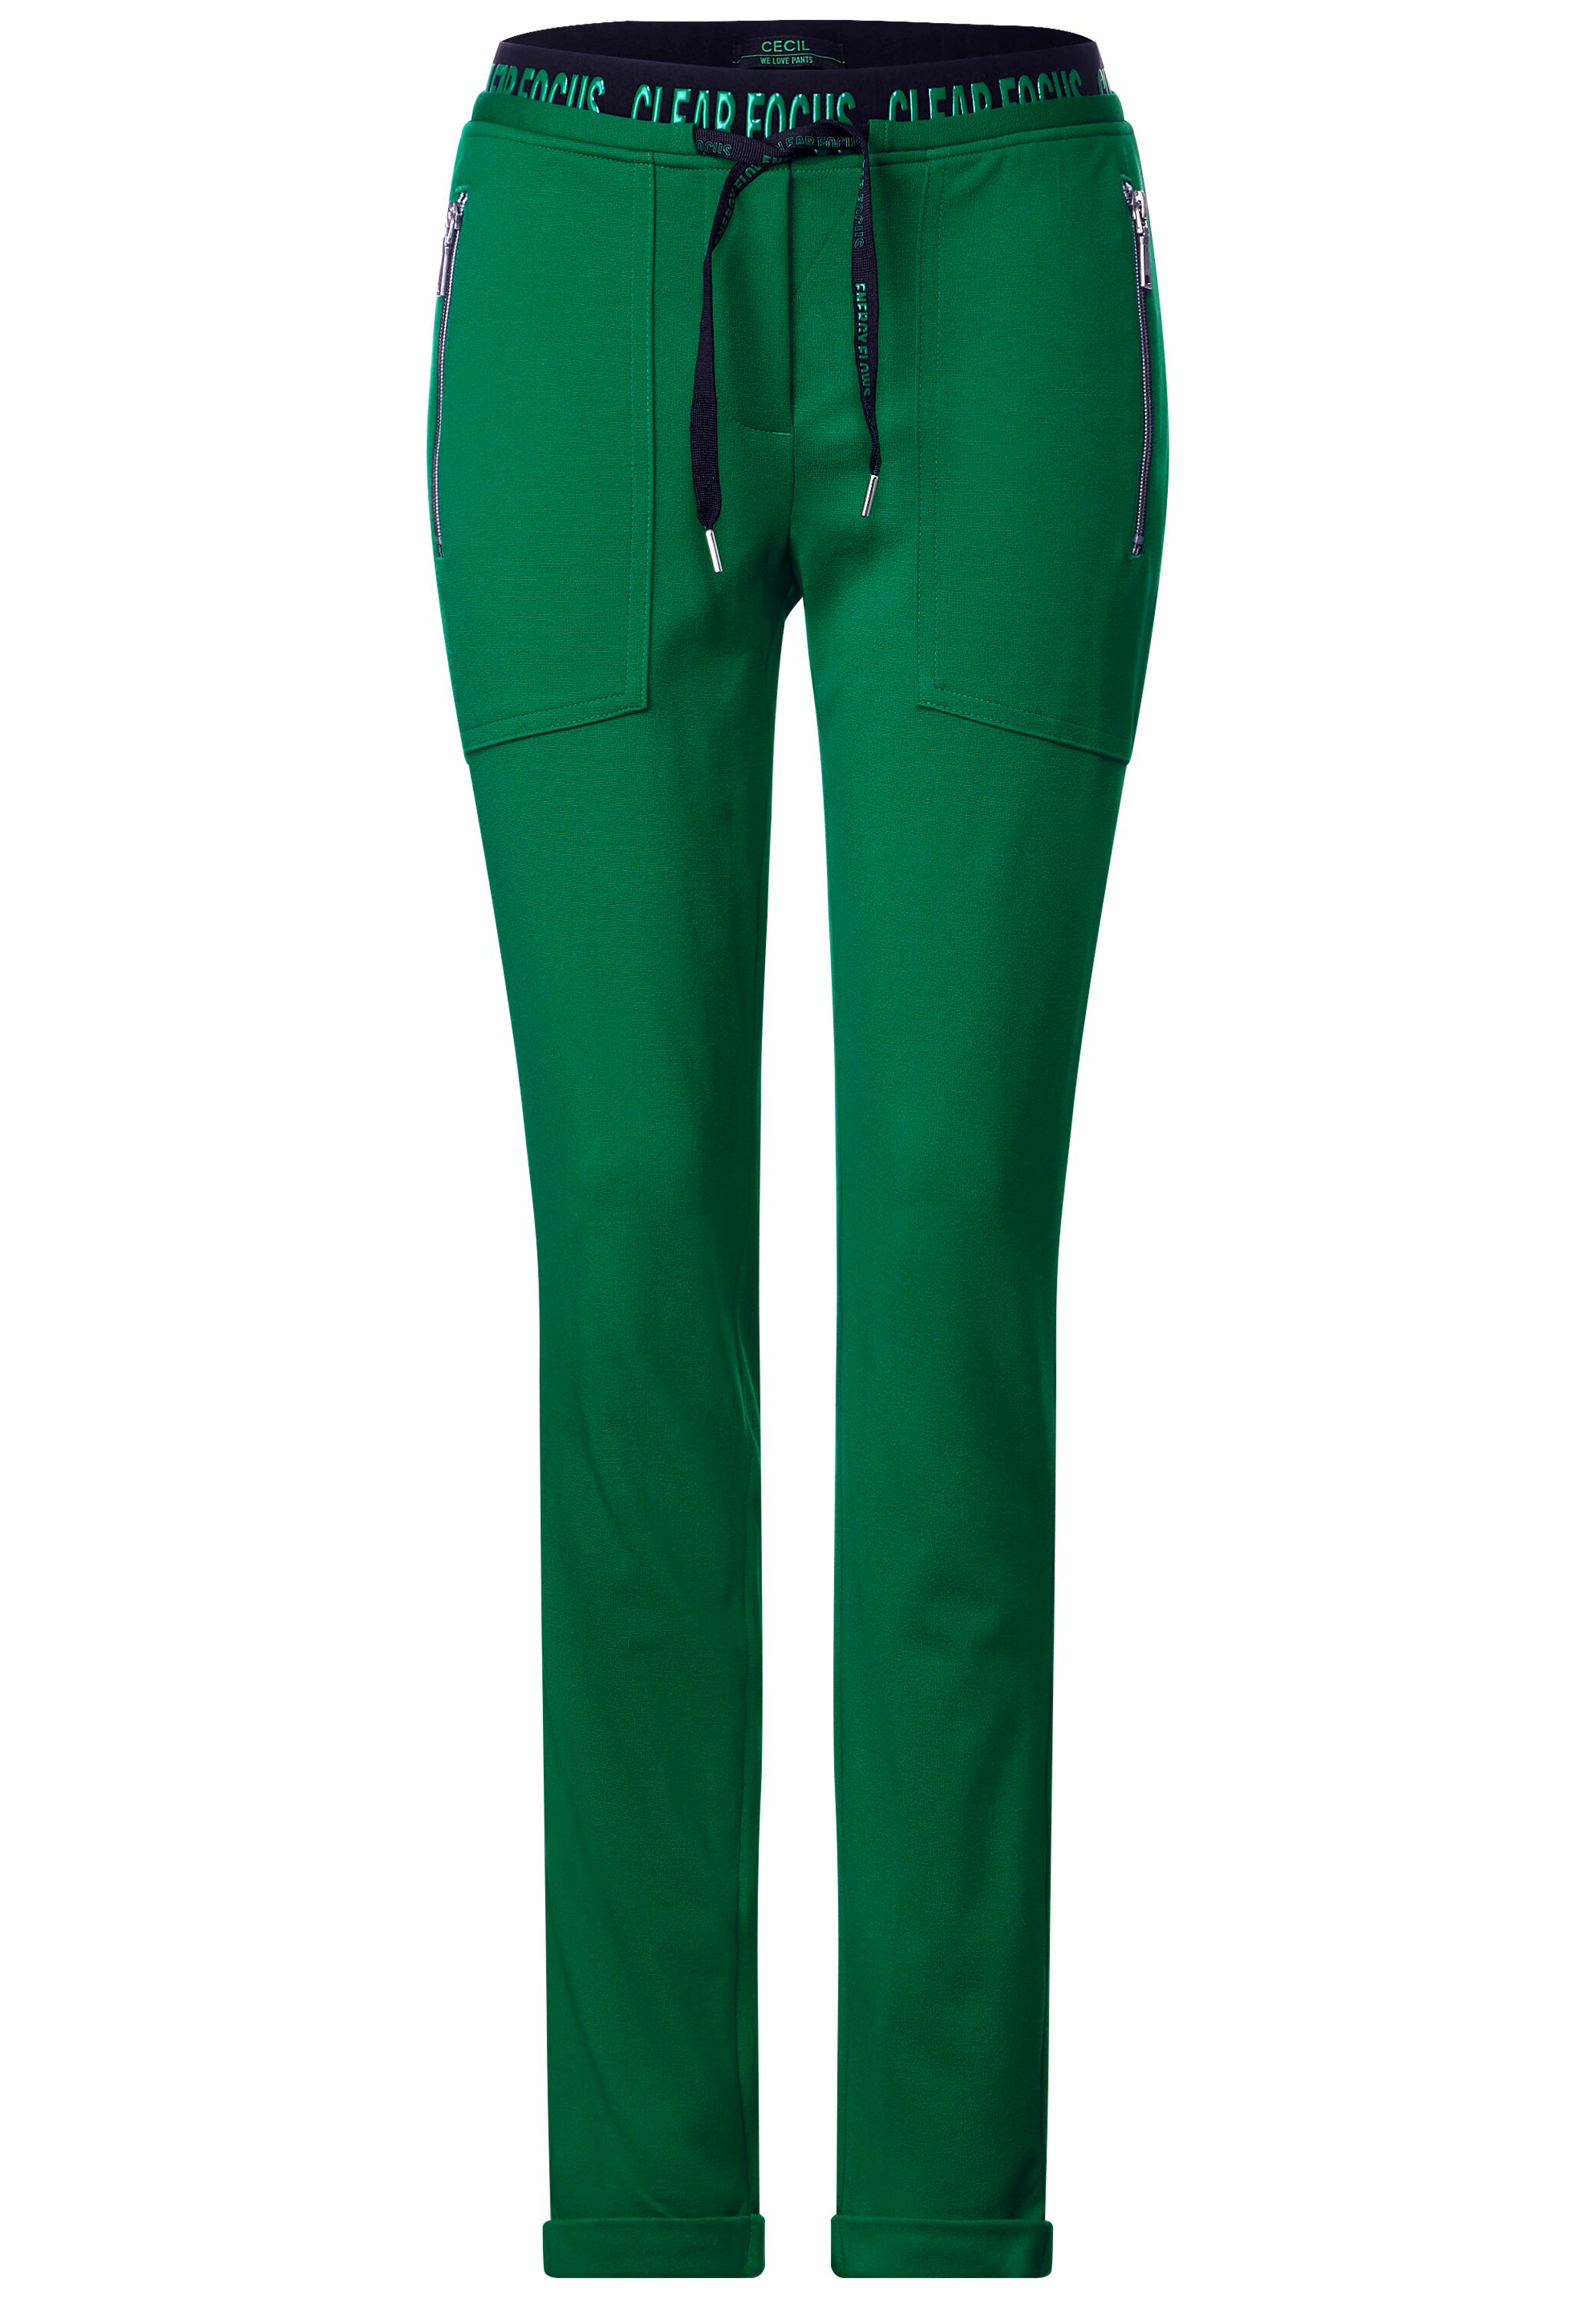 CECIL Joggpant Tracey in Easy - Mode CONCEPT Green SALE im reduziert B377015-15069